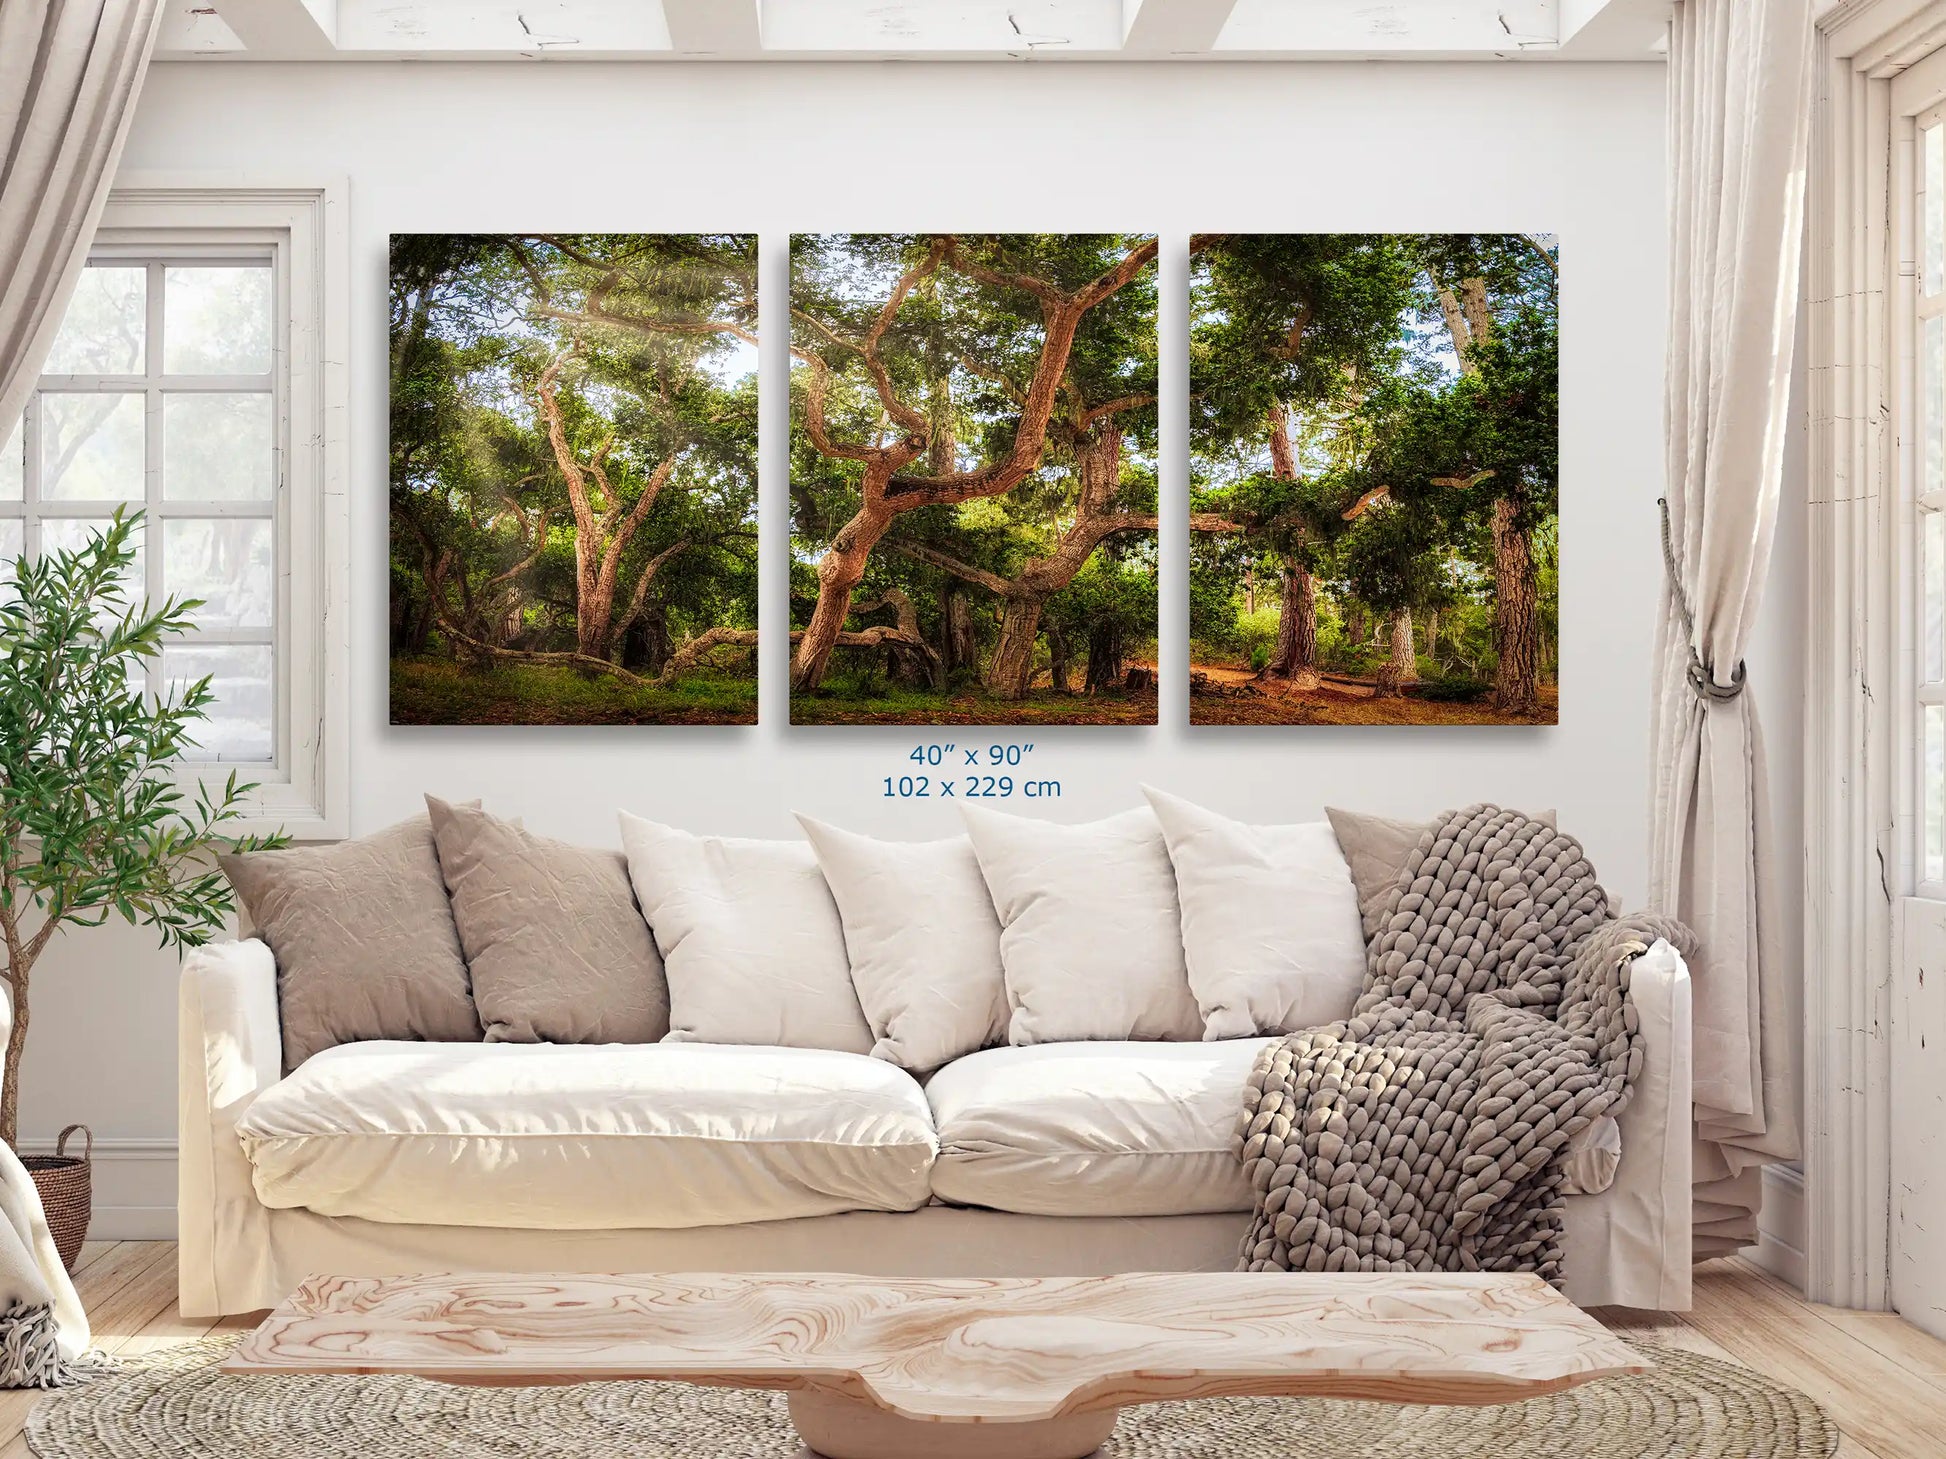 Inviting living room featuring an expansive 40x90" Coast Live Oak Tree wall art triptych, commanding attention and drawing nature into the home.